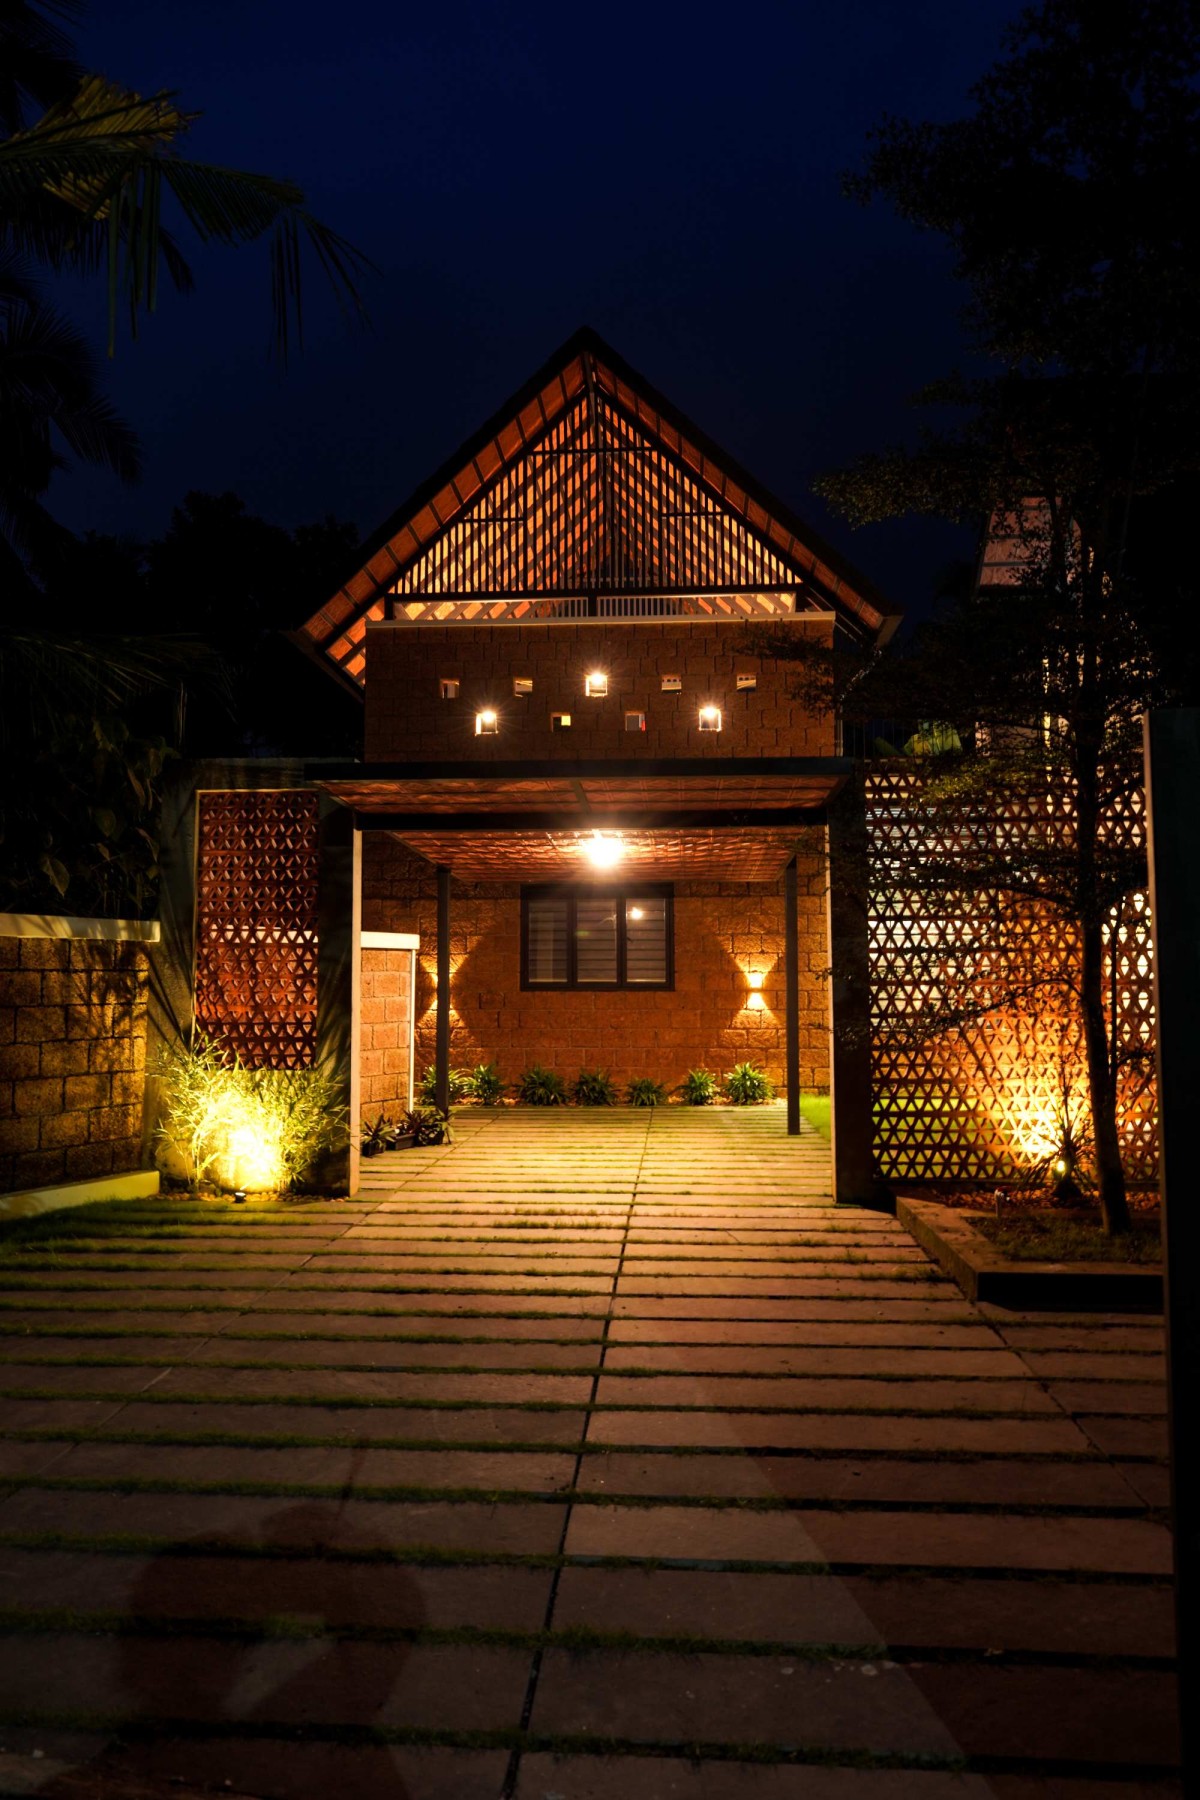 Night shot of exterior view of Canopy Home by Scribble Engine